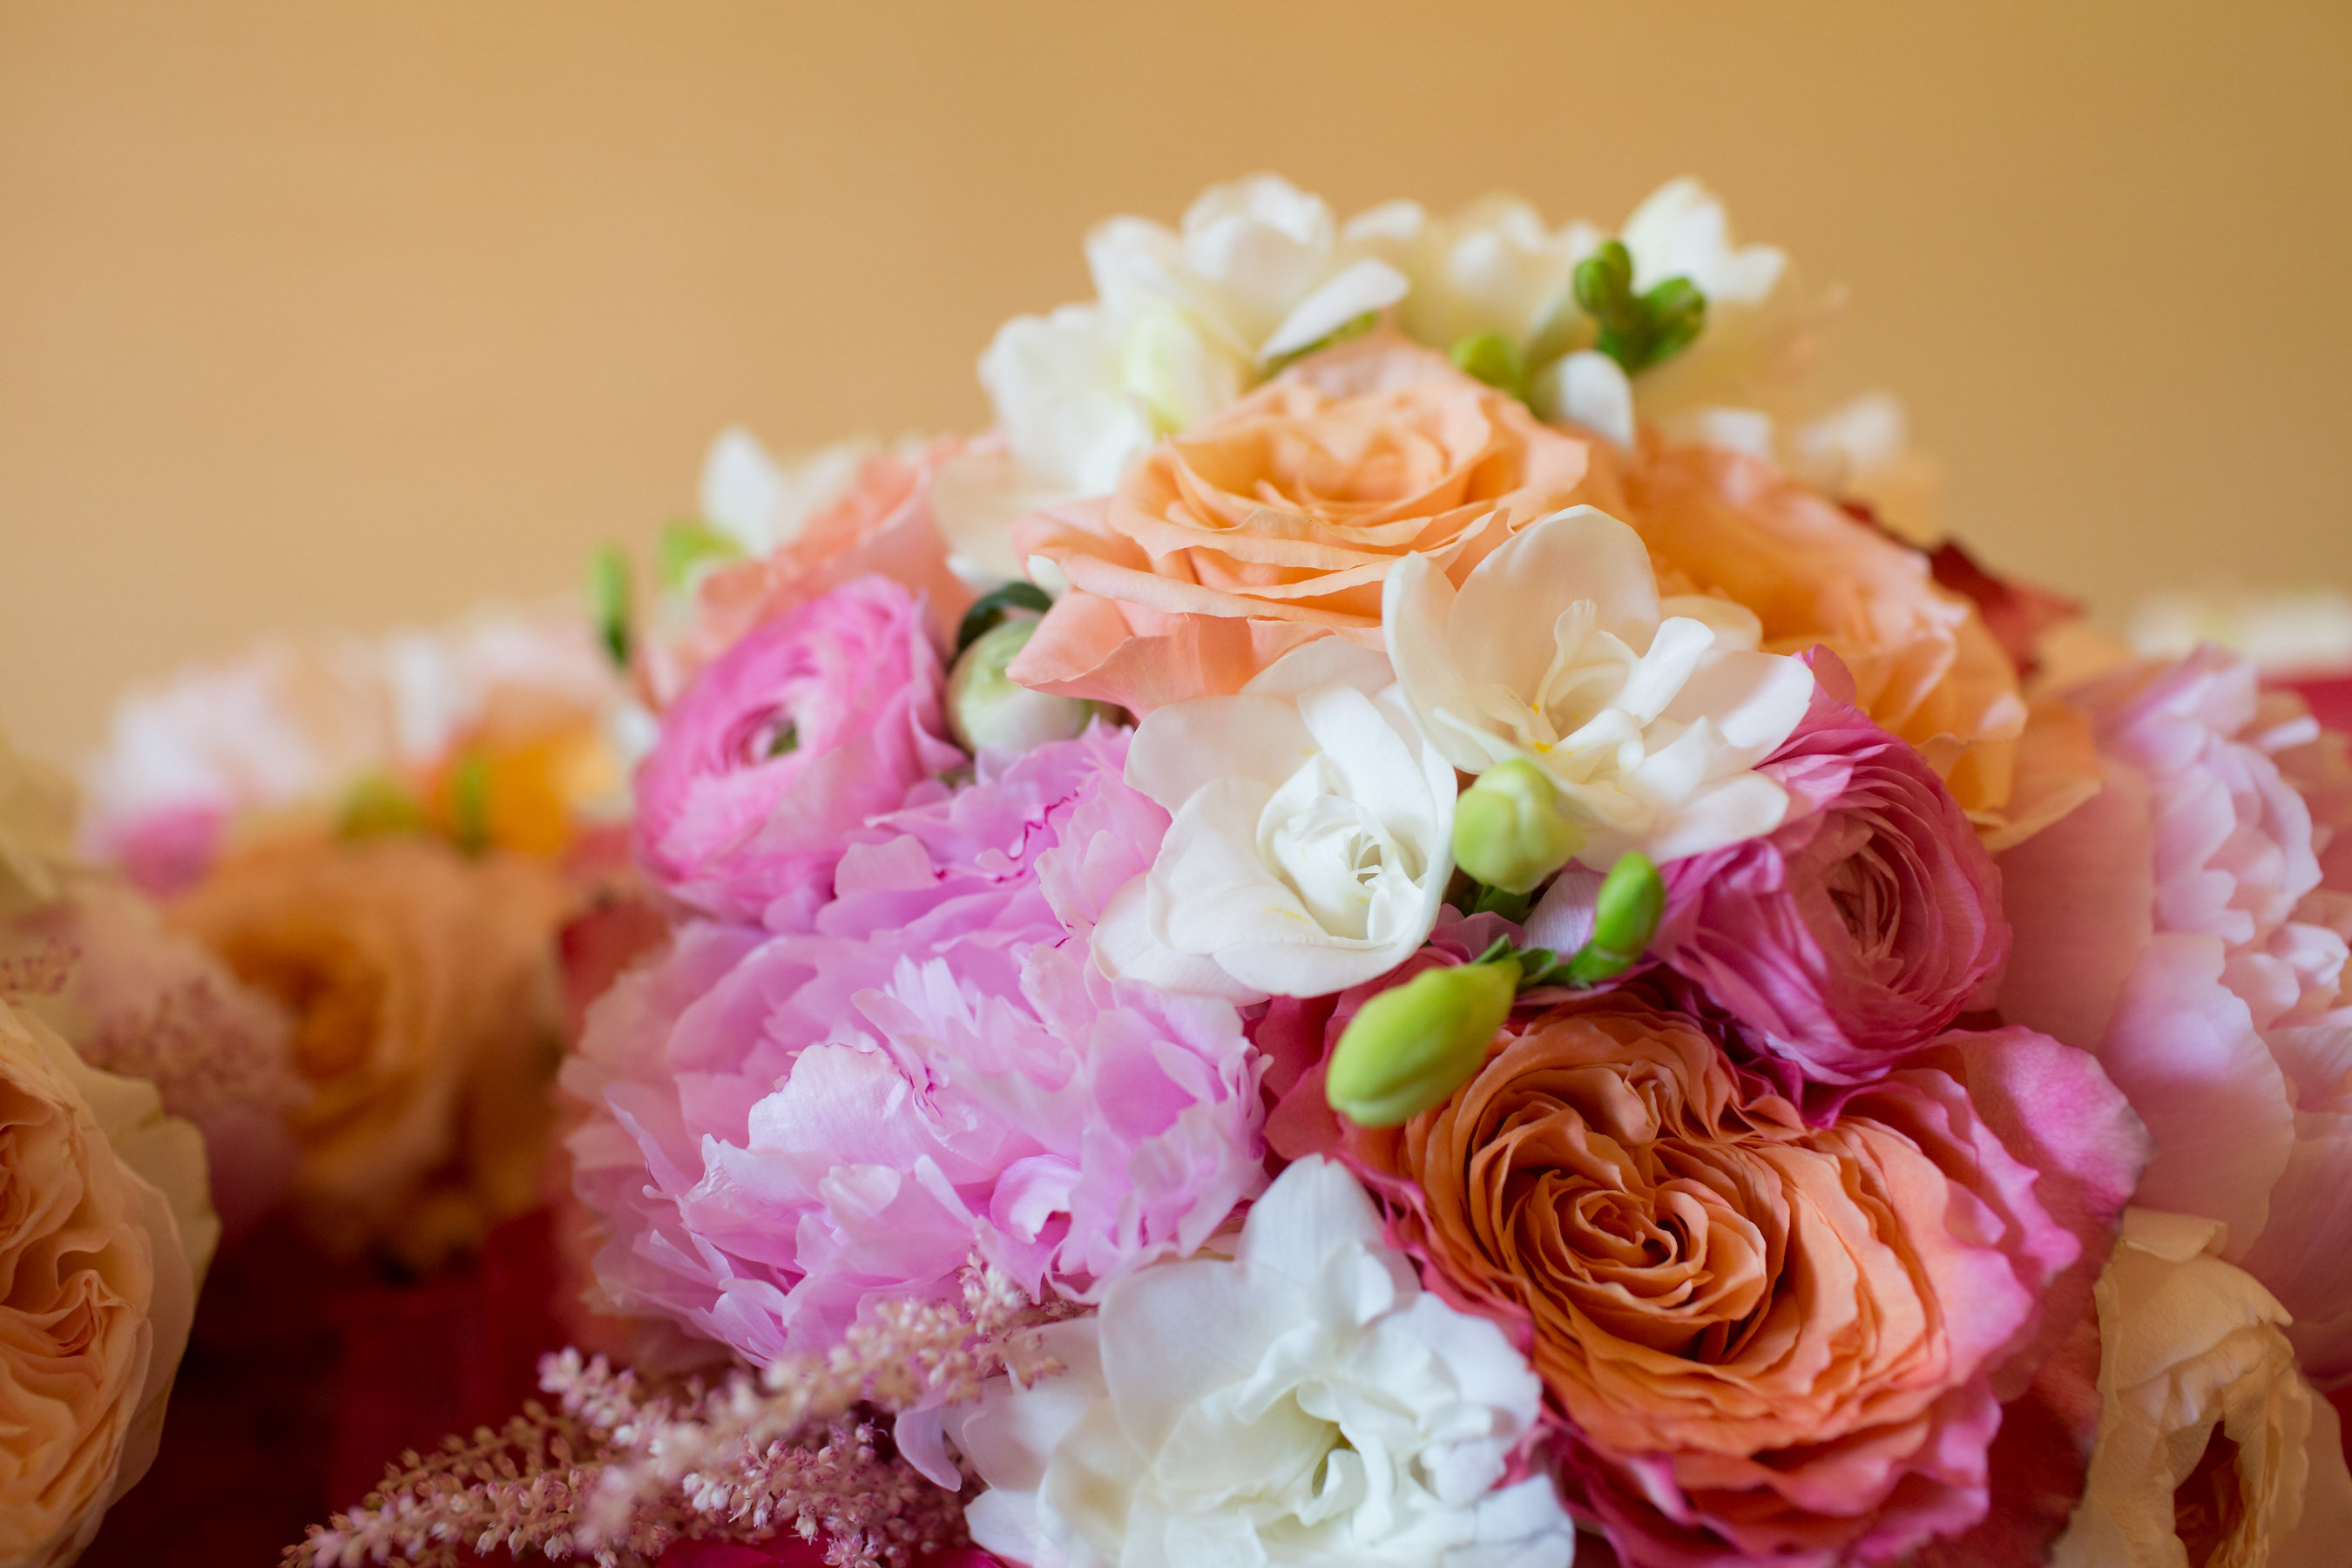 Cute and bright bridal bouquet